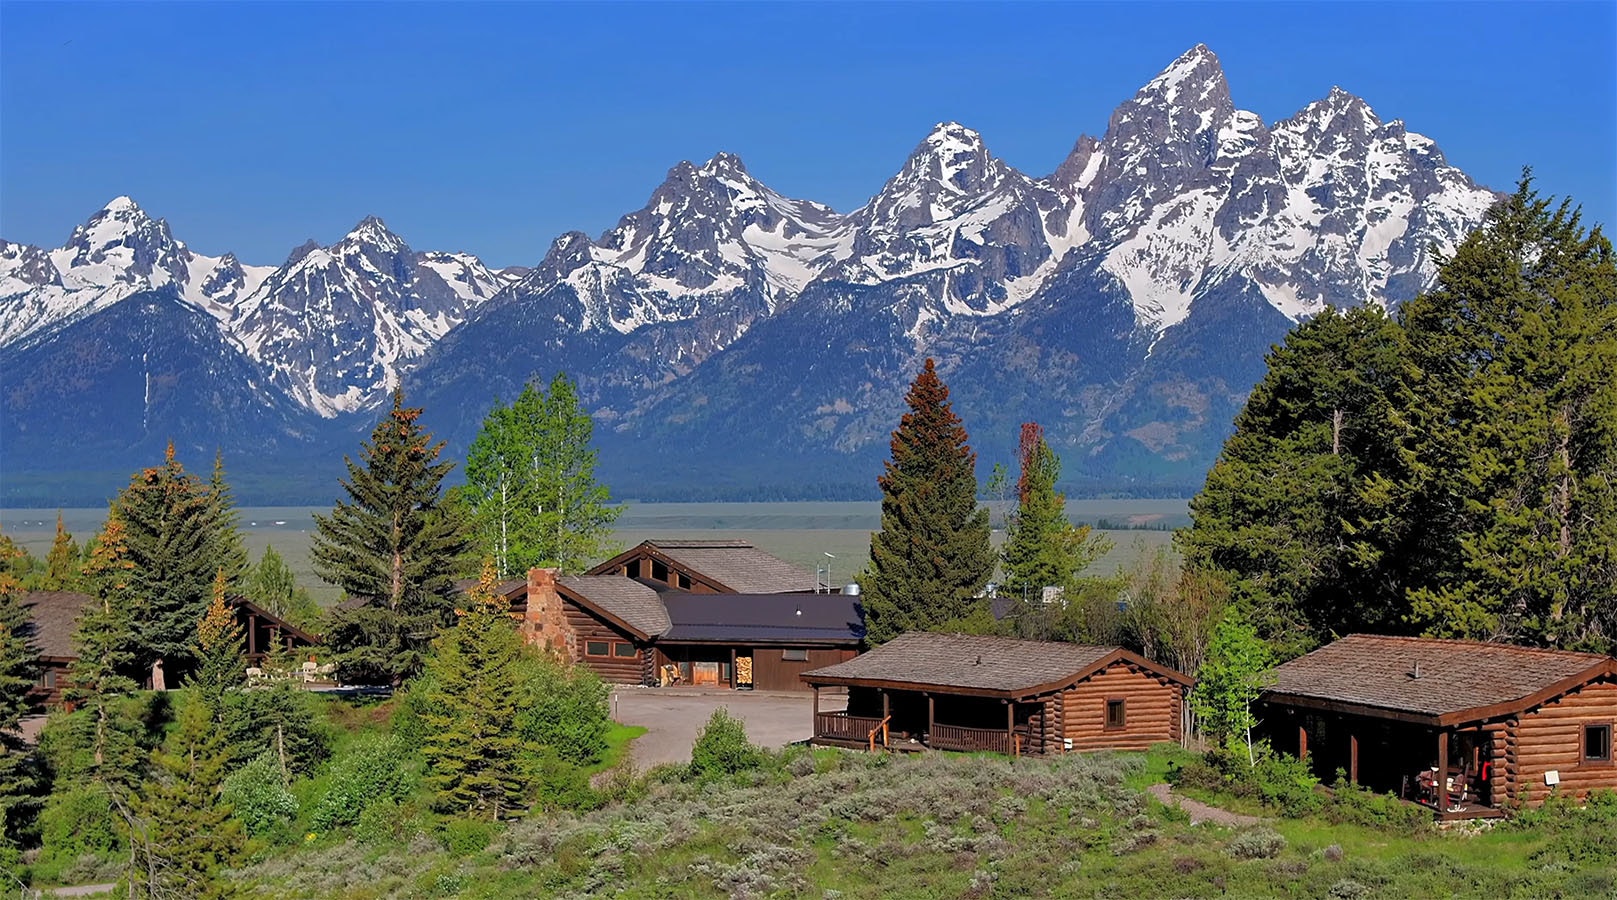 For the first time in a half-century, the historic Lost Creek Ranch in Teton County is for sale.